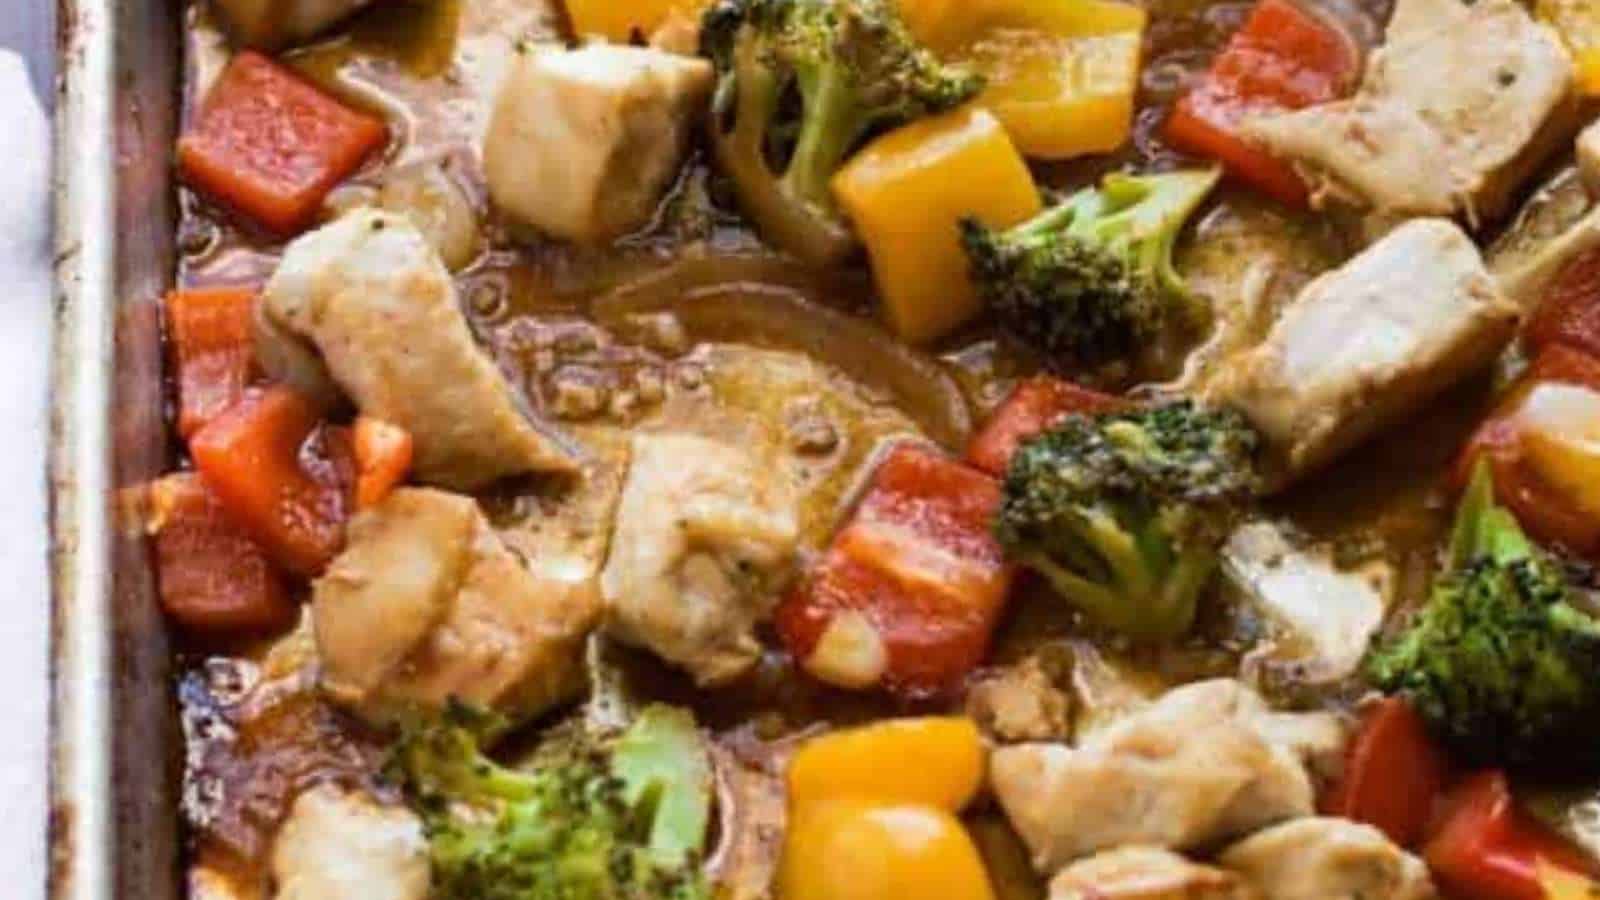 Chicken and vegetables in a baking dish.